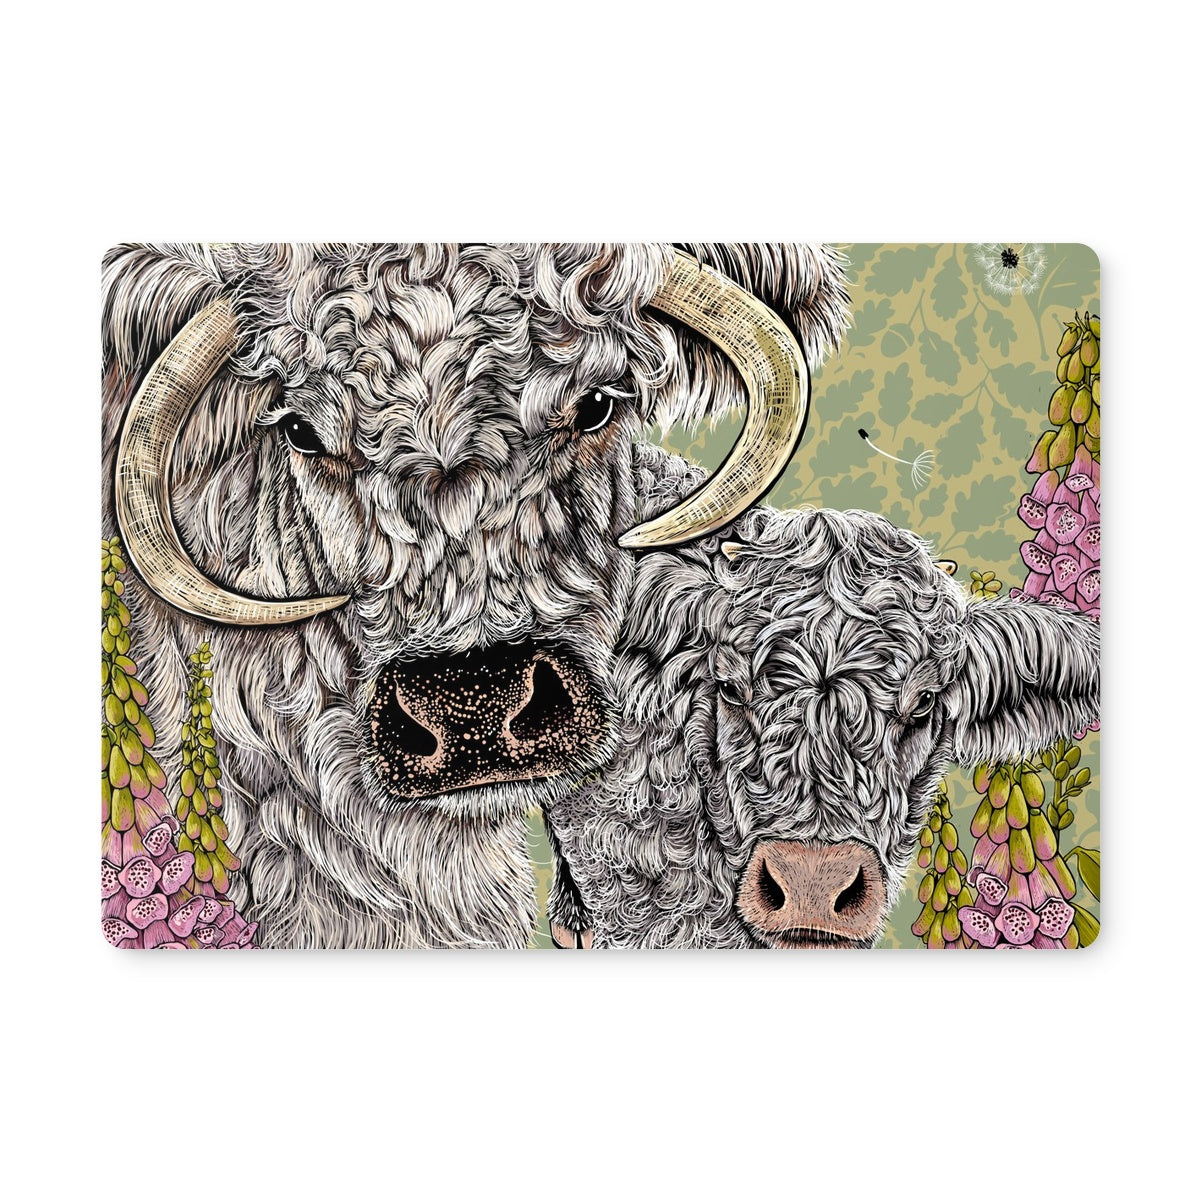 Longhorn Cows placemat by Fox and Boo